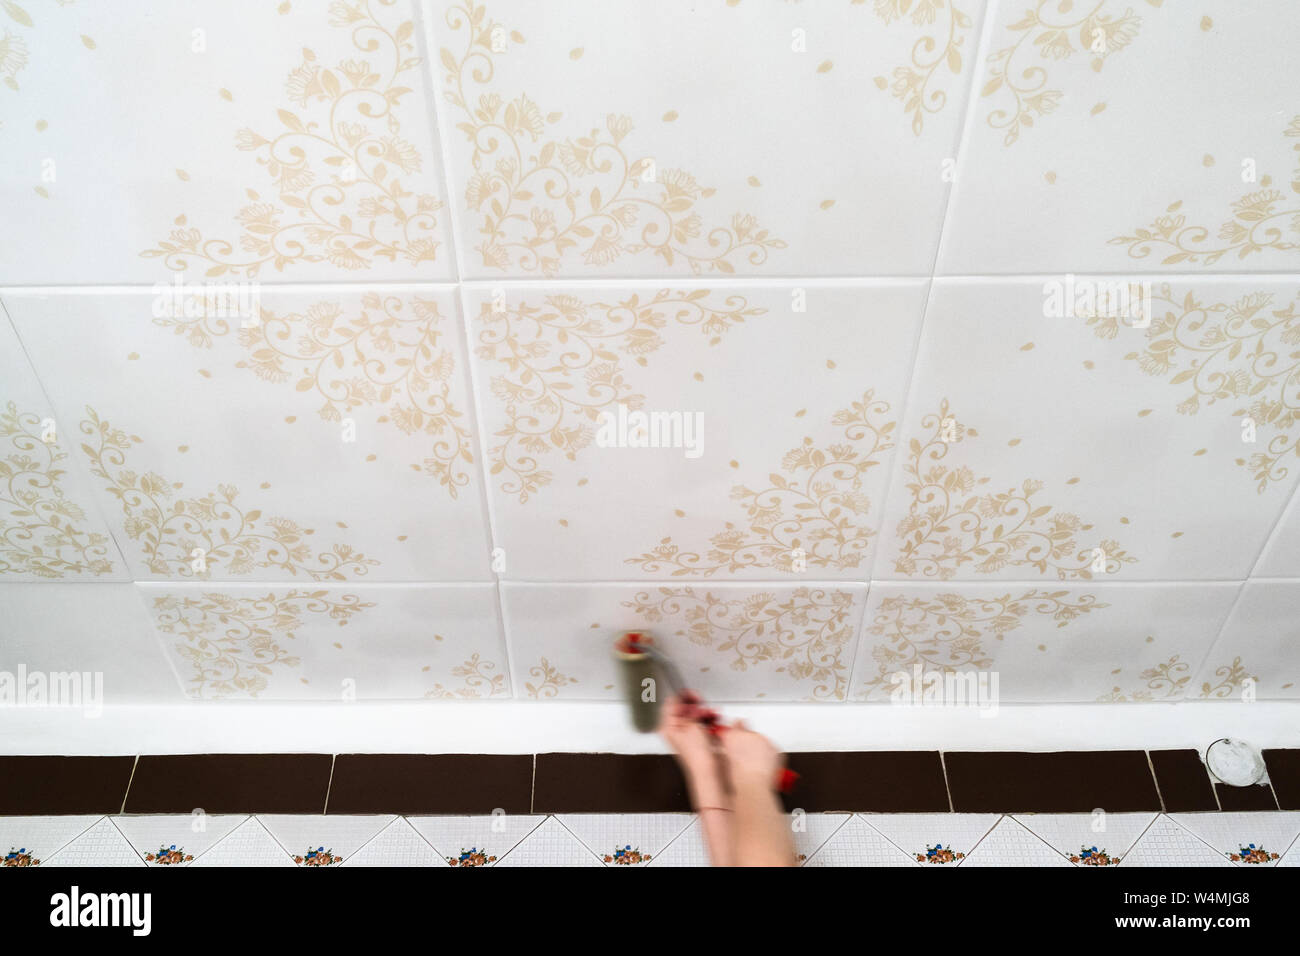 Fixing Styrofoam Ceiling Tiles With Roller At Home Kitchen Stock